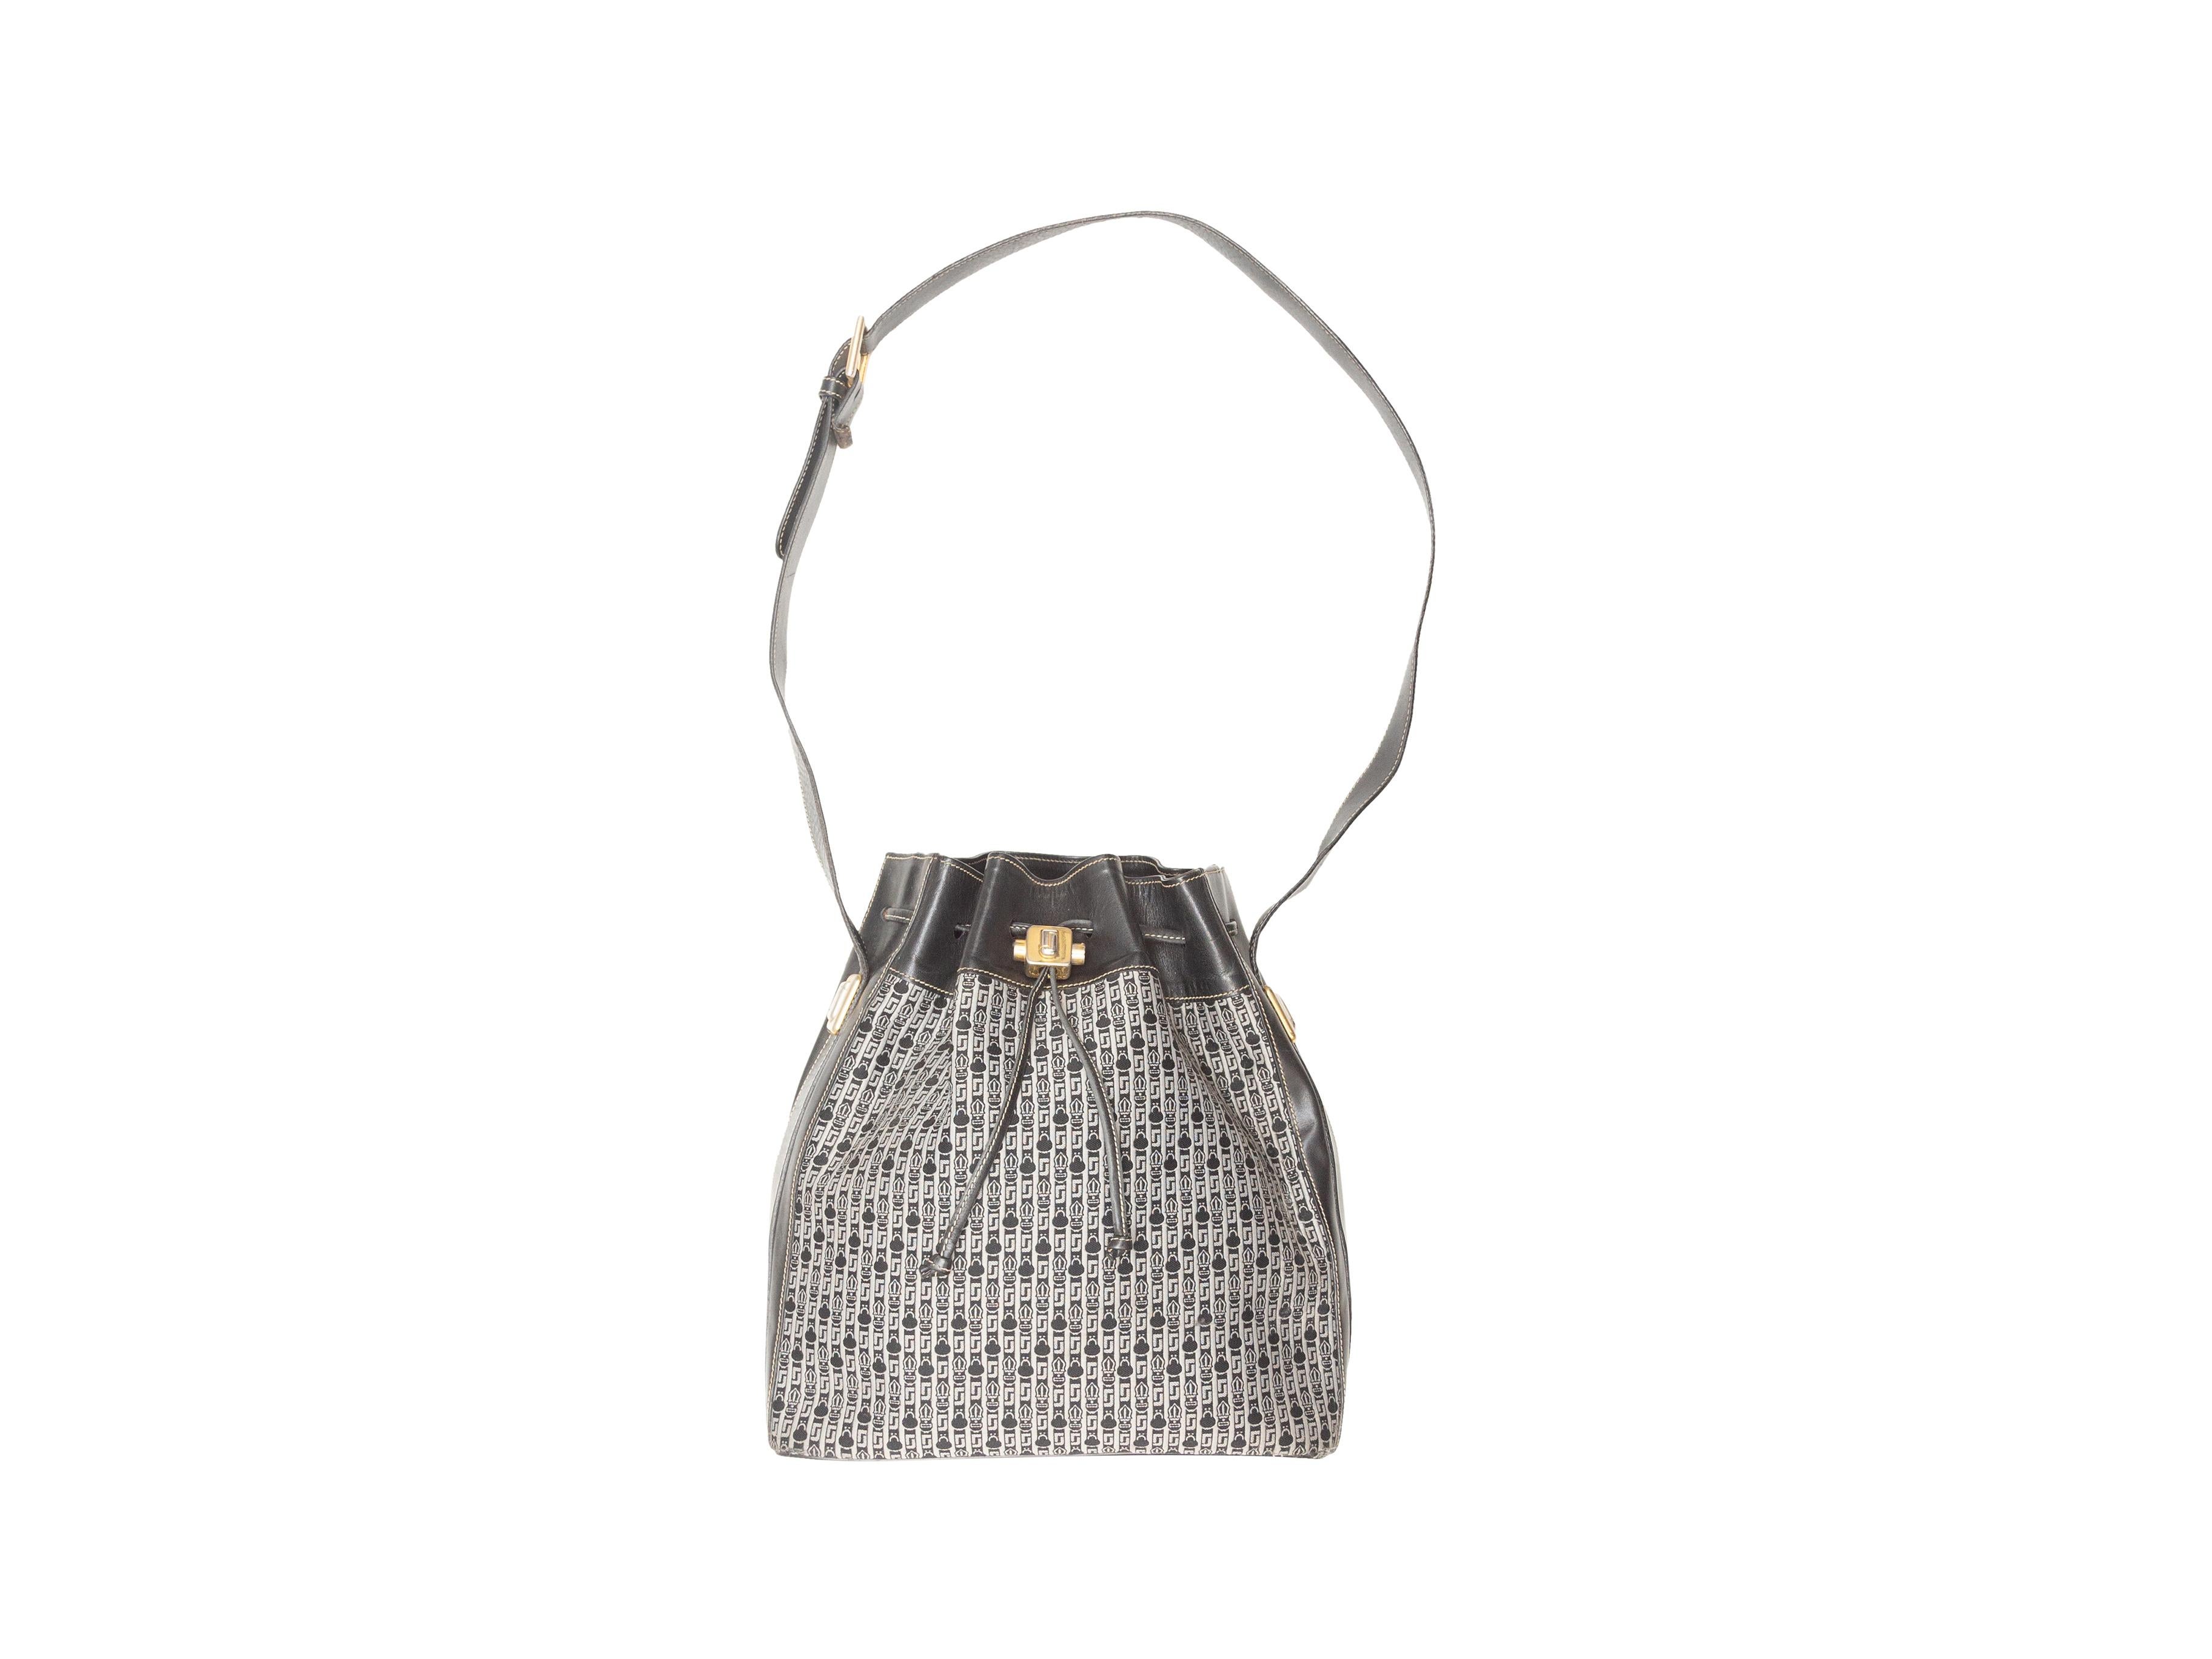 Product Details: Vintage Black & Grey Judith Leiber Bucket Bag. This bag features a canvas body, leather trim, gold-tone hardware, a single flat adjustable shoulder strap, and a drawstring closure at the top. 10